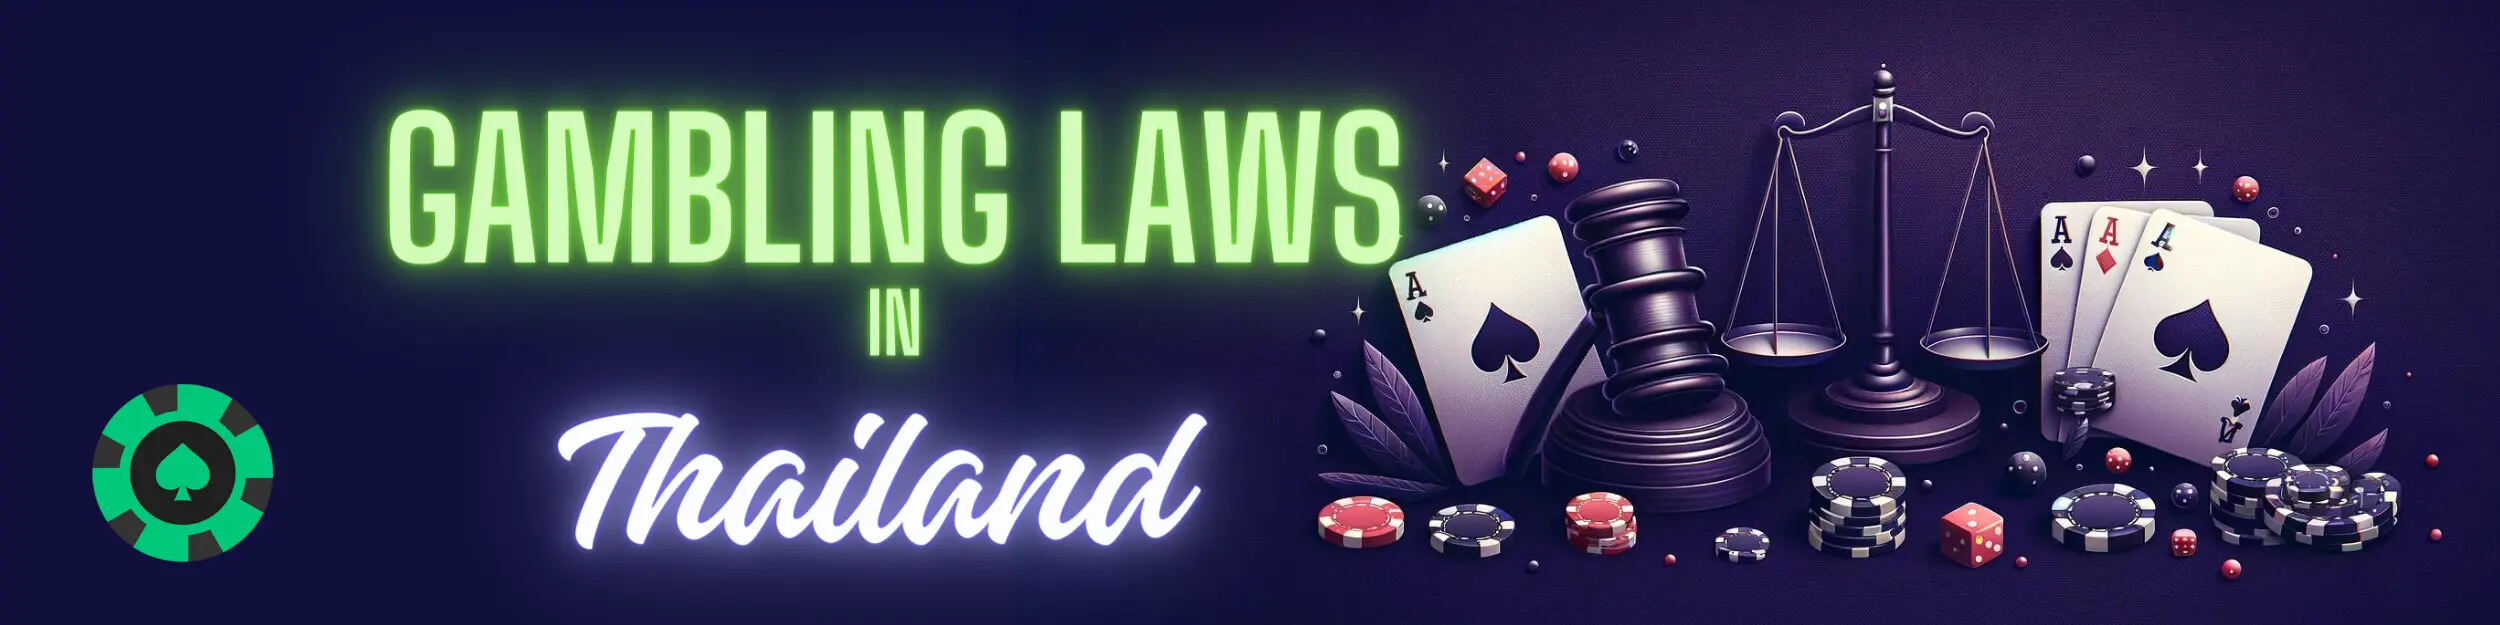 Gambling Laws in Thailand